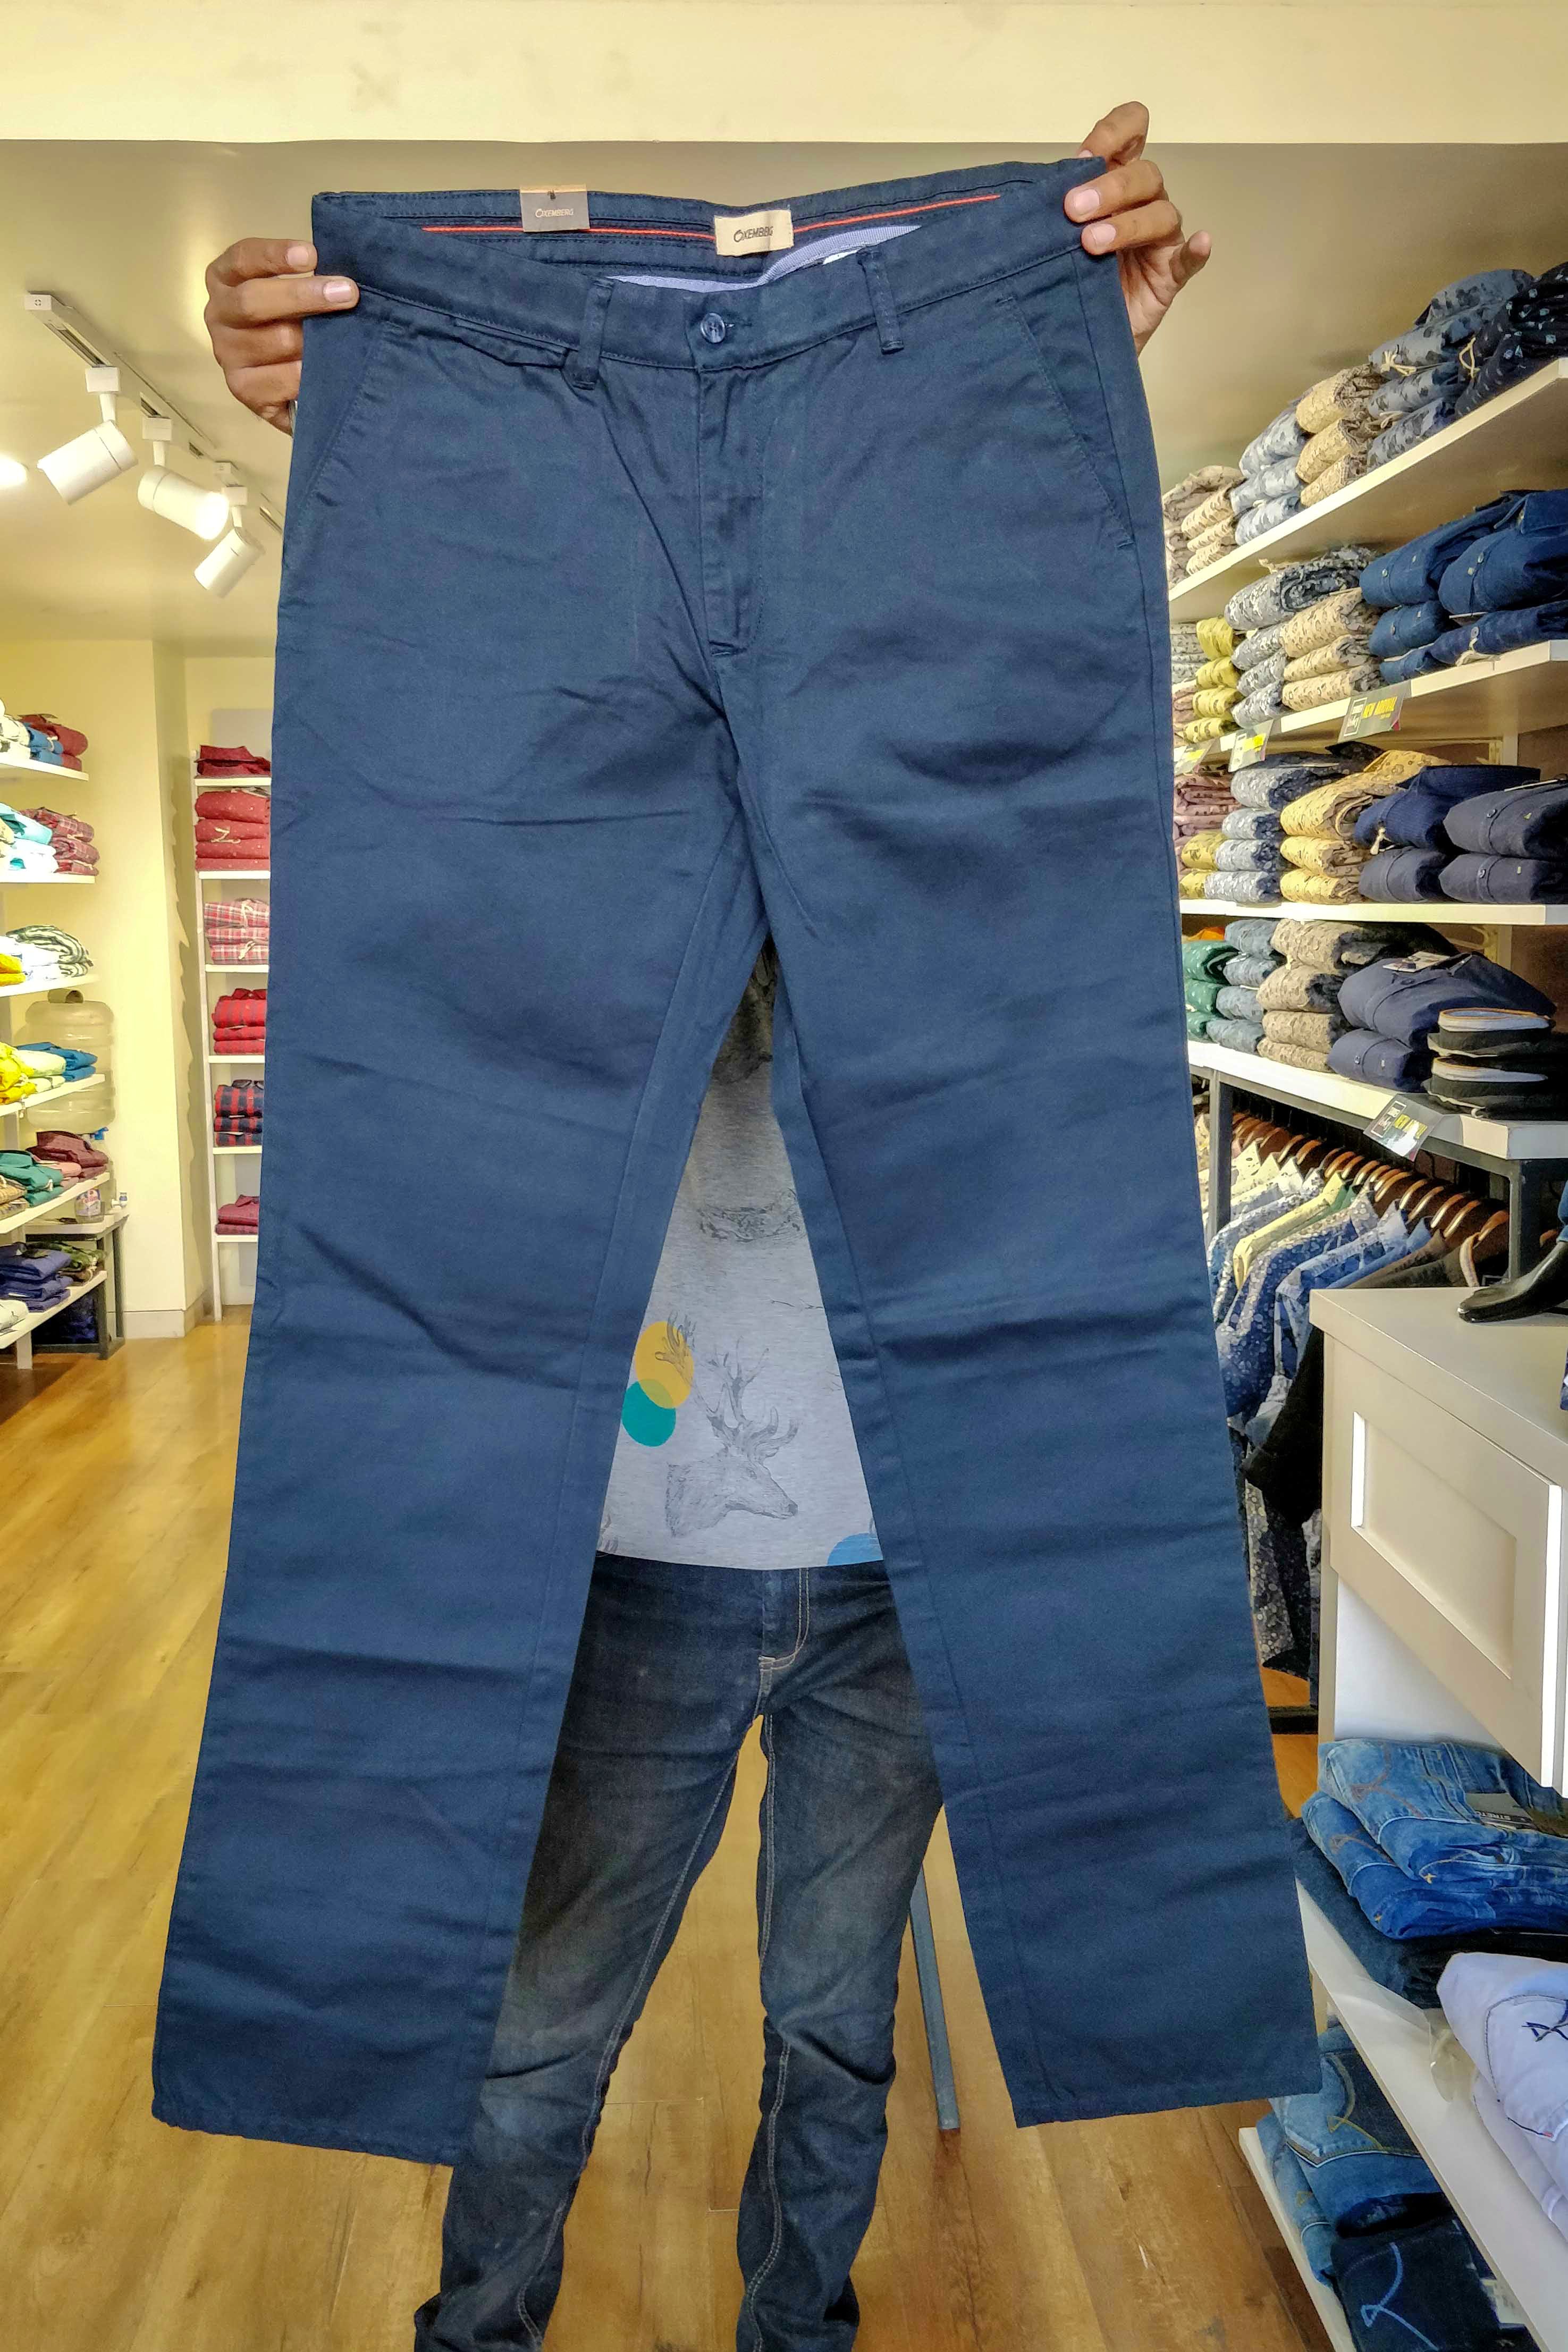 Oxemberg Regular Fit Casual Wear Trousers Pants